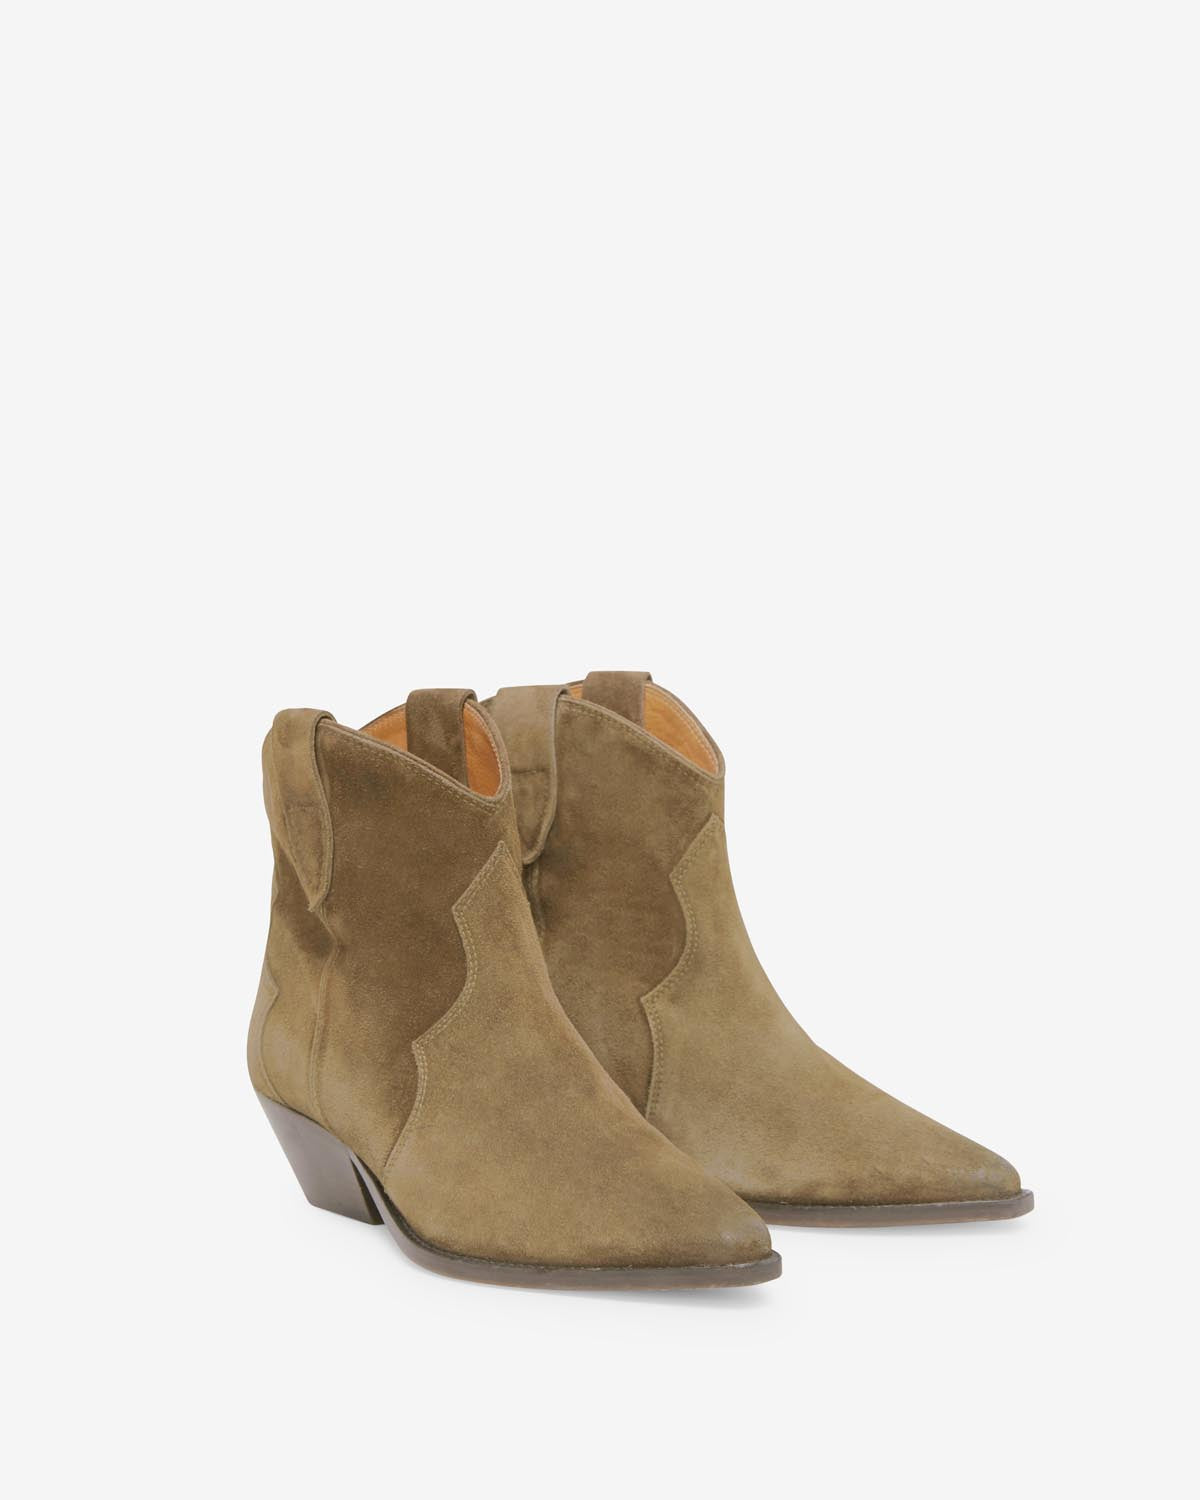 Dewina cowboy boots Woman Taupe 3